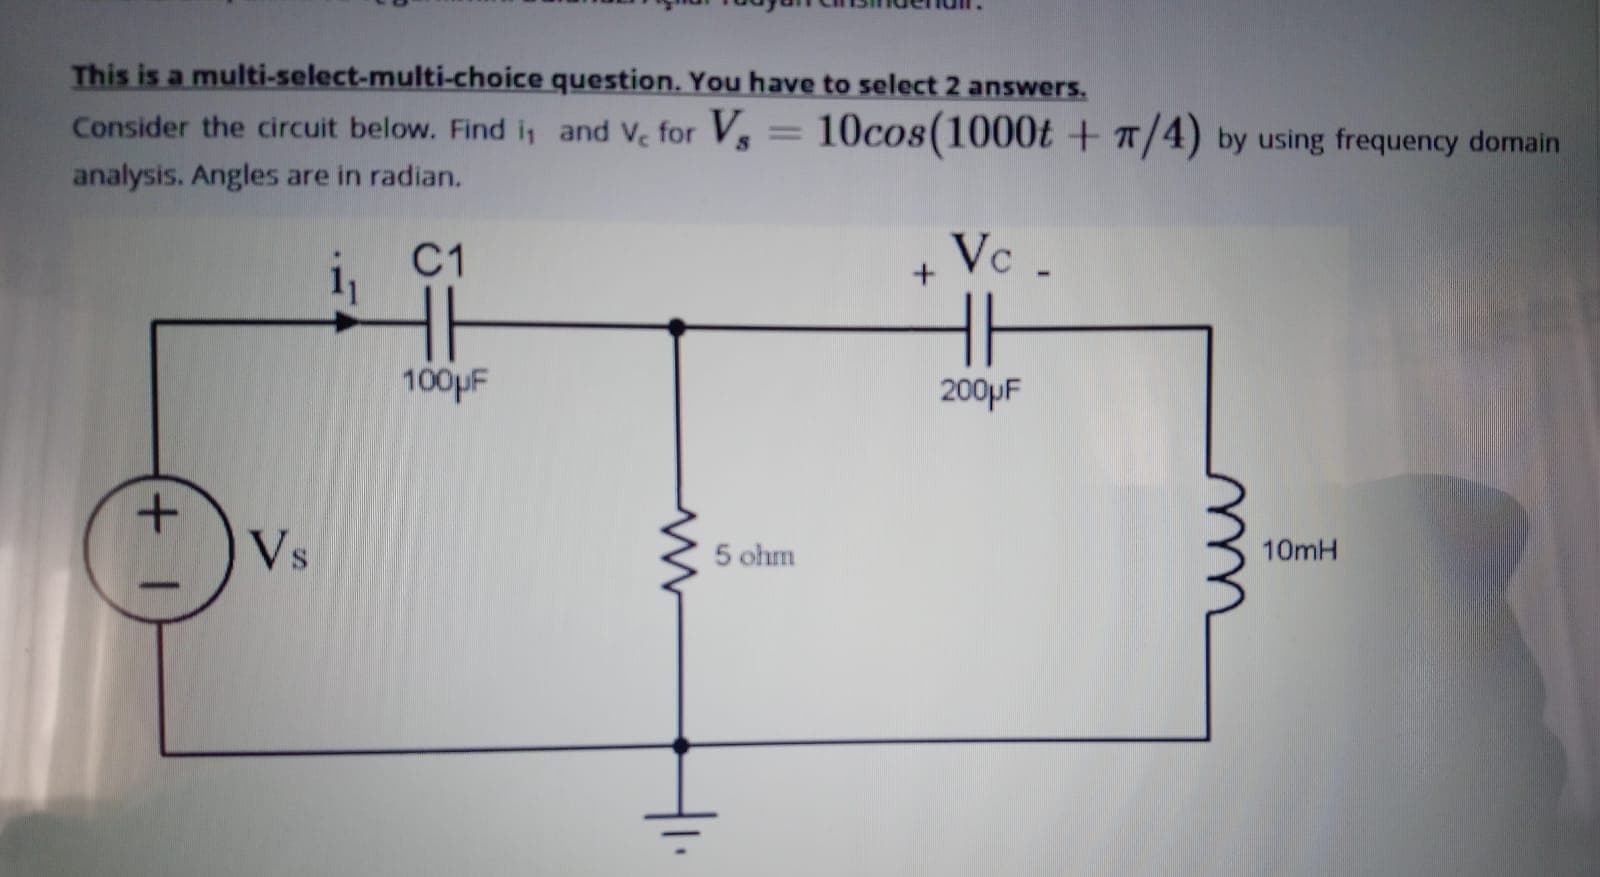 This is a multi-select-multi-choice question. You have to select 2 answers.
Consider the circuit below. Find i, and Ve for Vs = 10cos(1000t + a/4) by using frequency domain
analysis. Angles are in radian.
C1
Vc .
H
100pF
200PF
Vs
5 ohm
10mH
